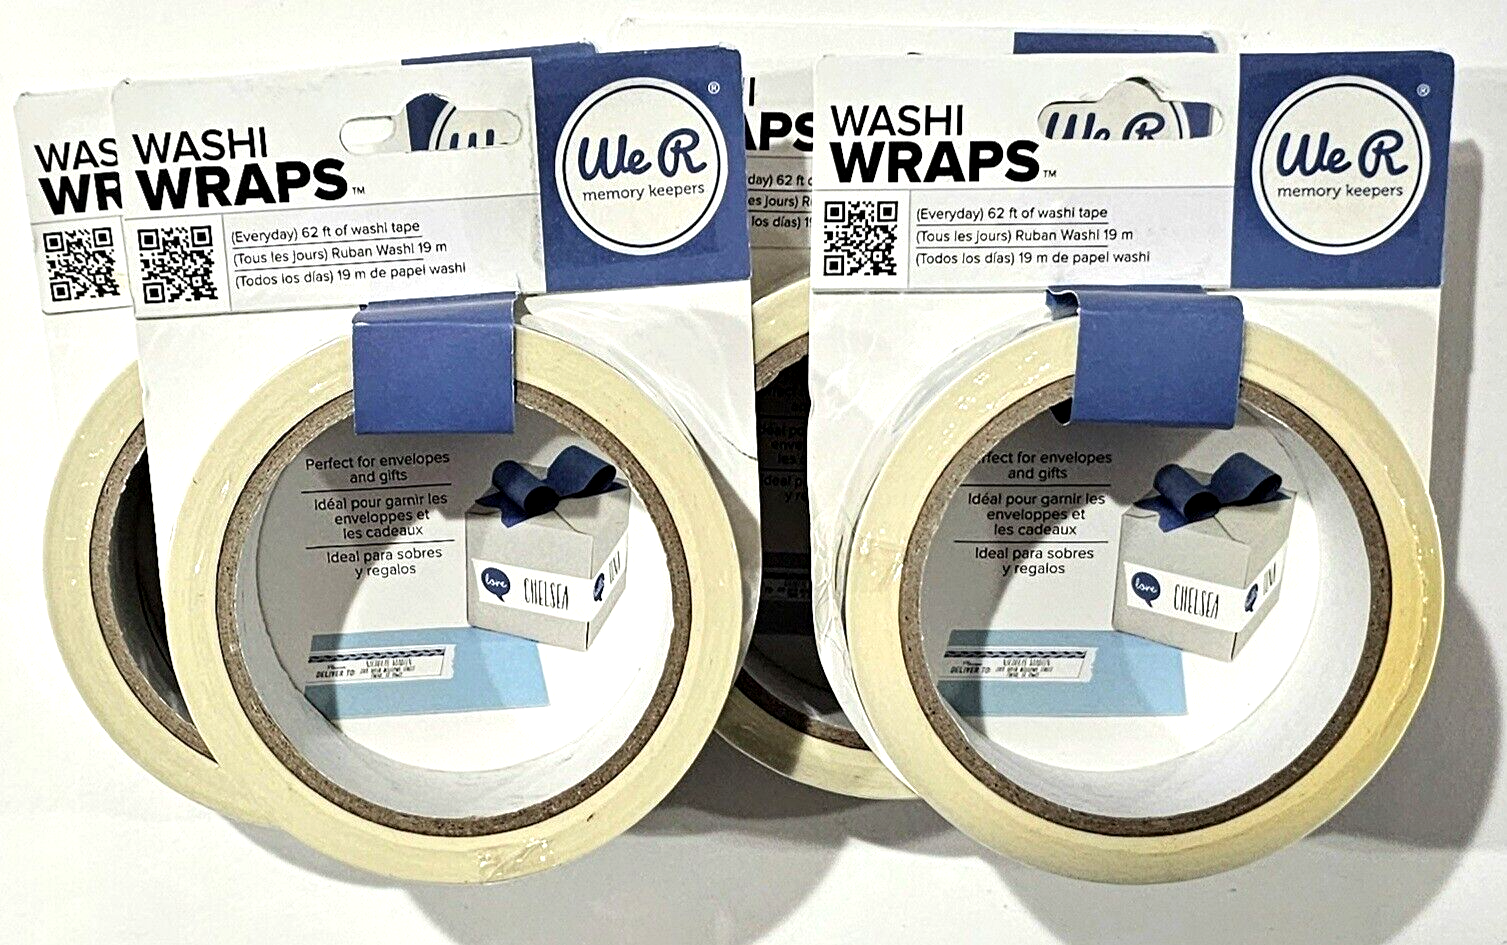 4 Pack Washi Wraps We R Memory Keepers 62 Ft Of Tape Everyday Blue - $22.99